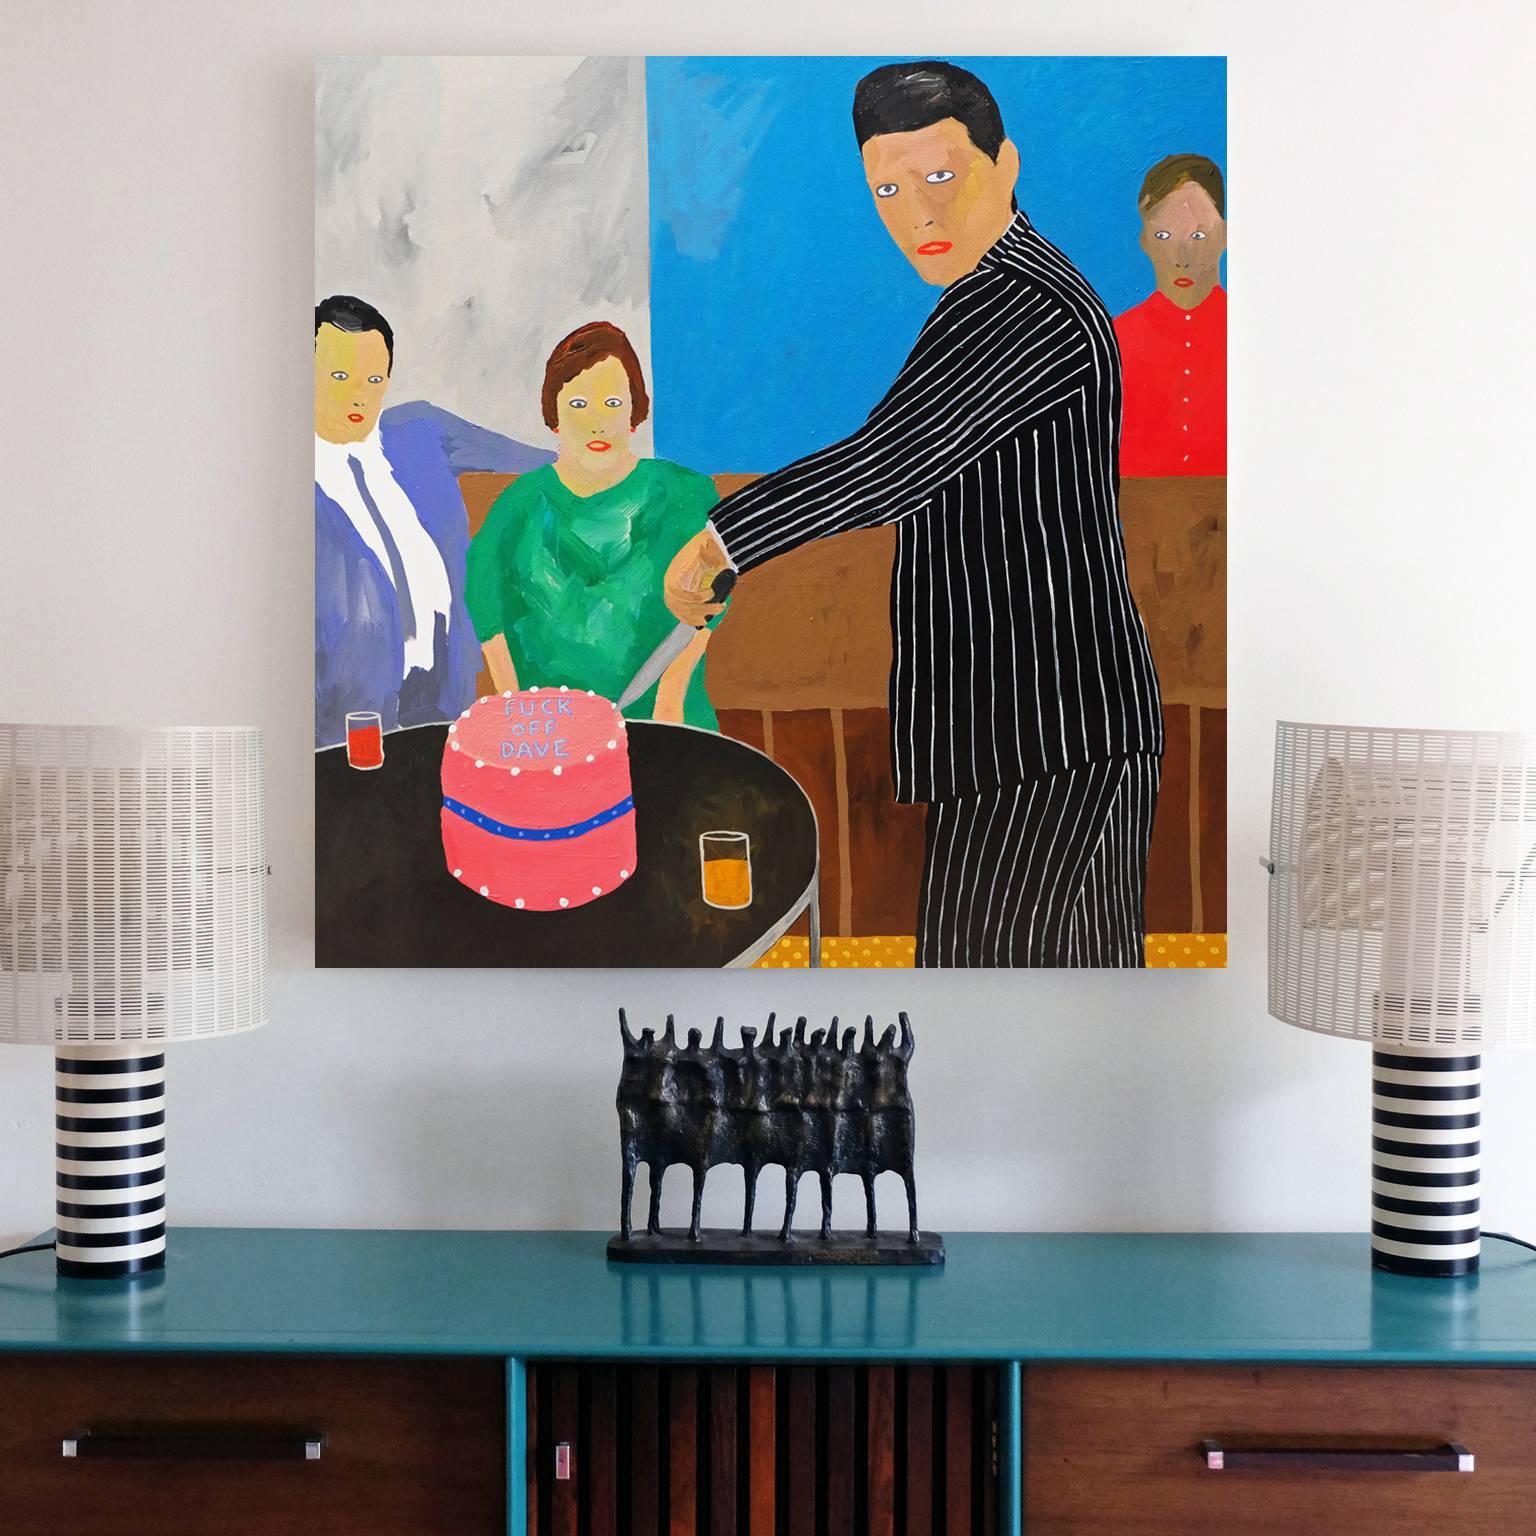 Acrylic on canvas by Alan Fears, 2017.

Alan Fears (b. 1974) is an emerging British artist who was shortlisted for the John Moores Painting prize 2018 and featured on the cover of the summer issue of the Paris Review 2019.

'A naive artist, a